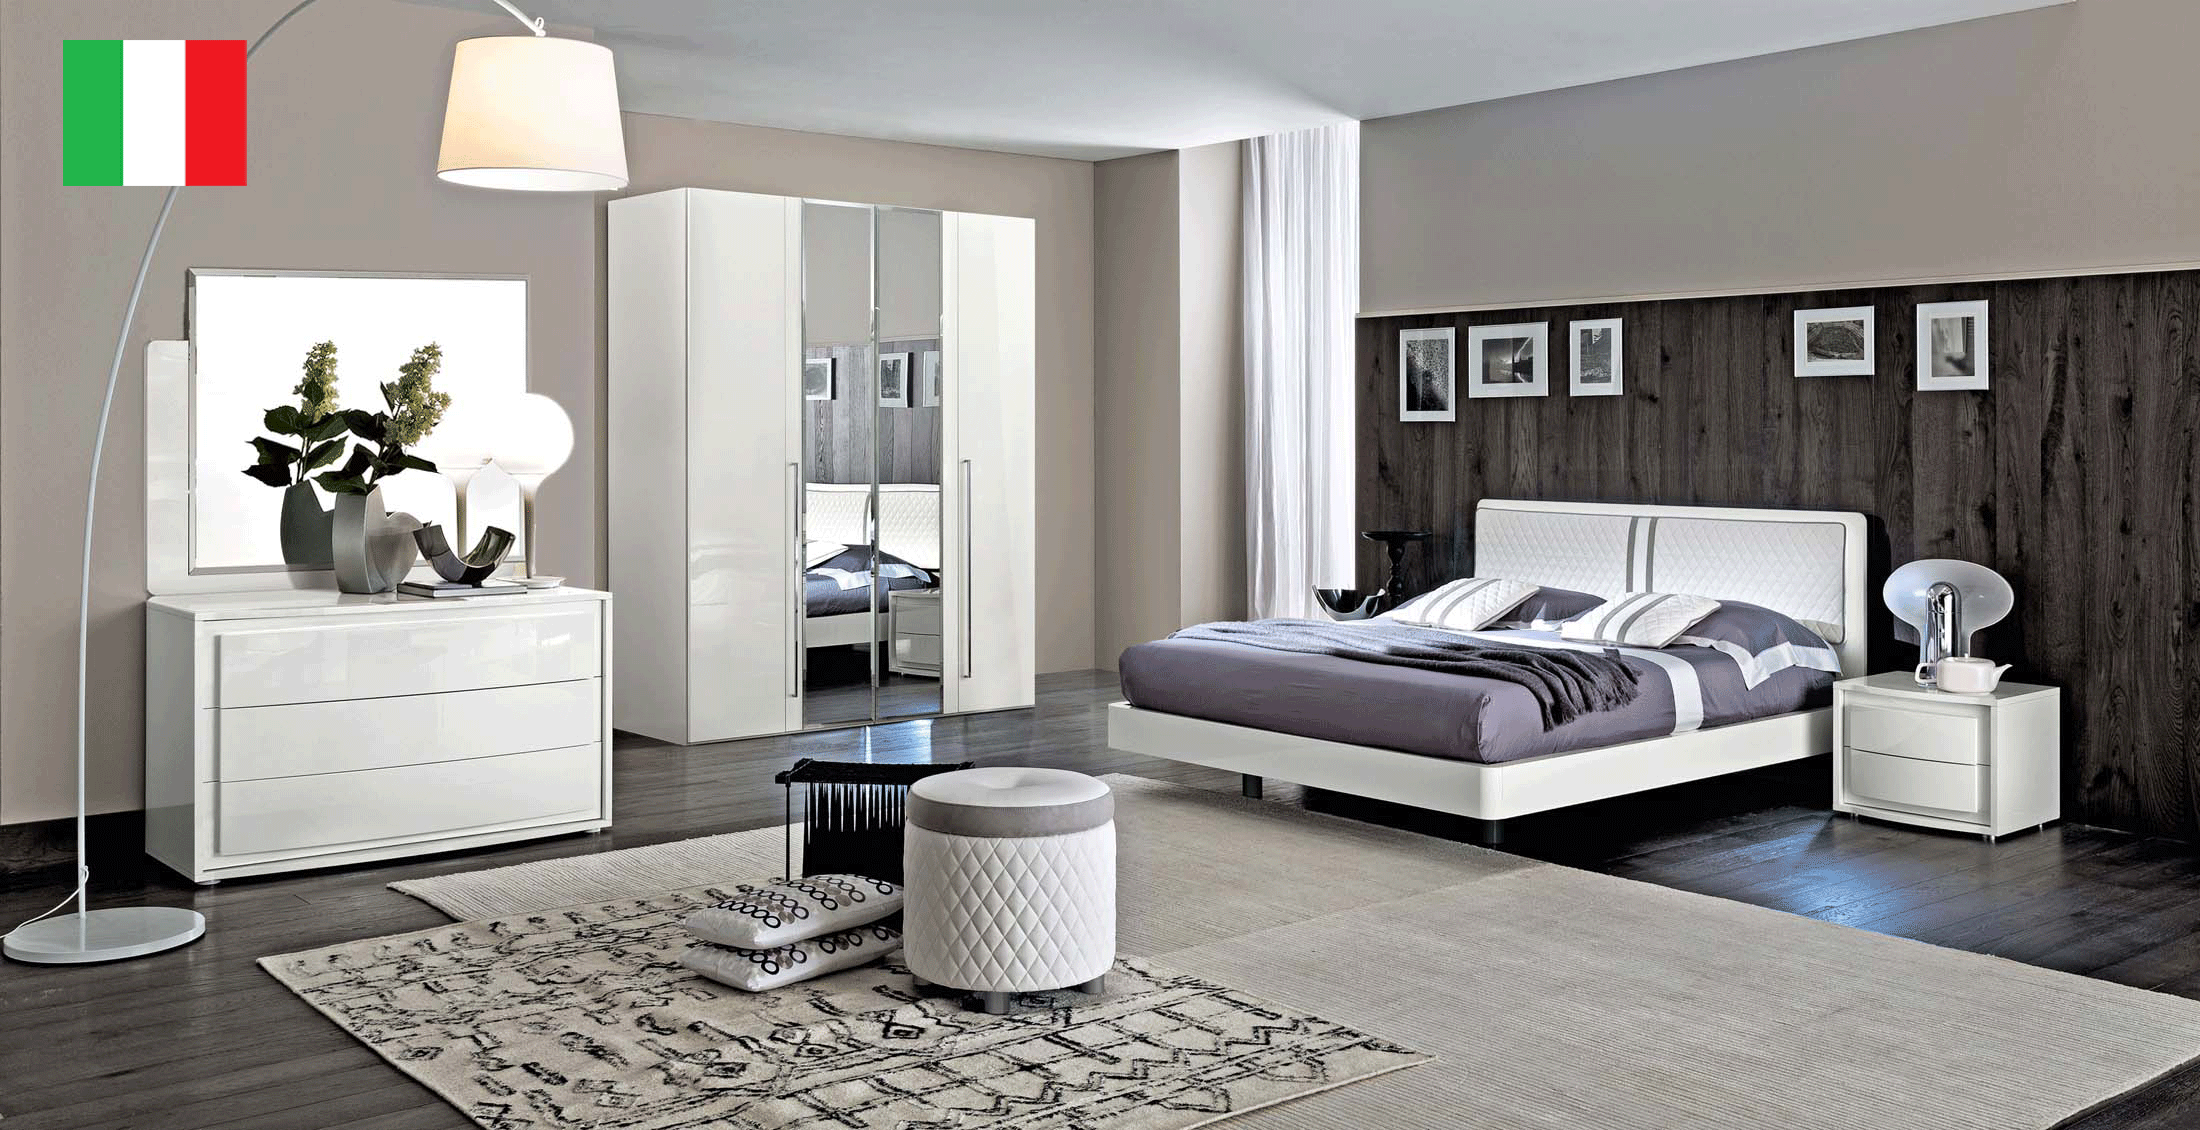 Brands Camel Gold Collection, Italy Dama Bianca Bedroom by CamelGroup Italy